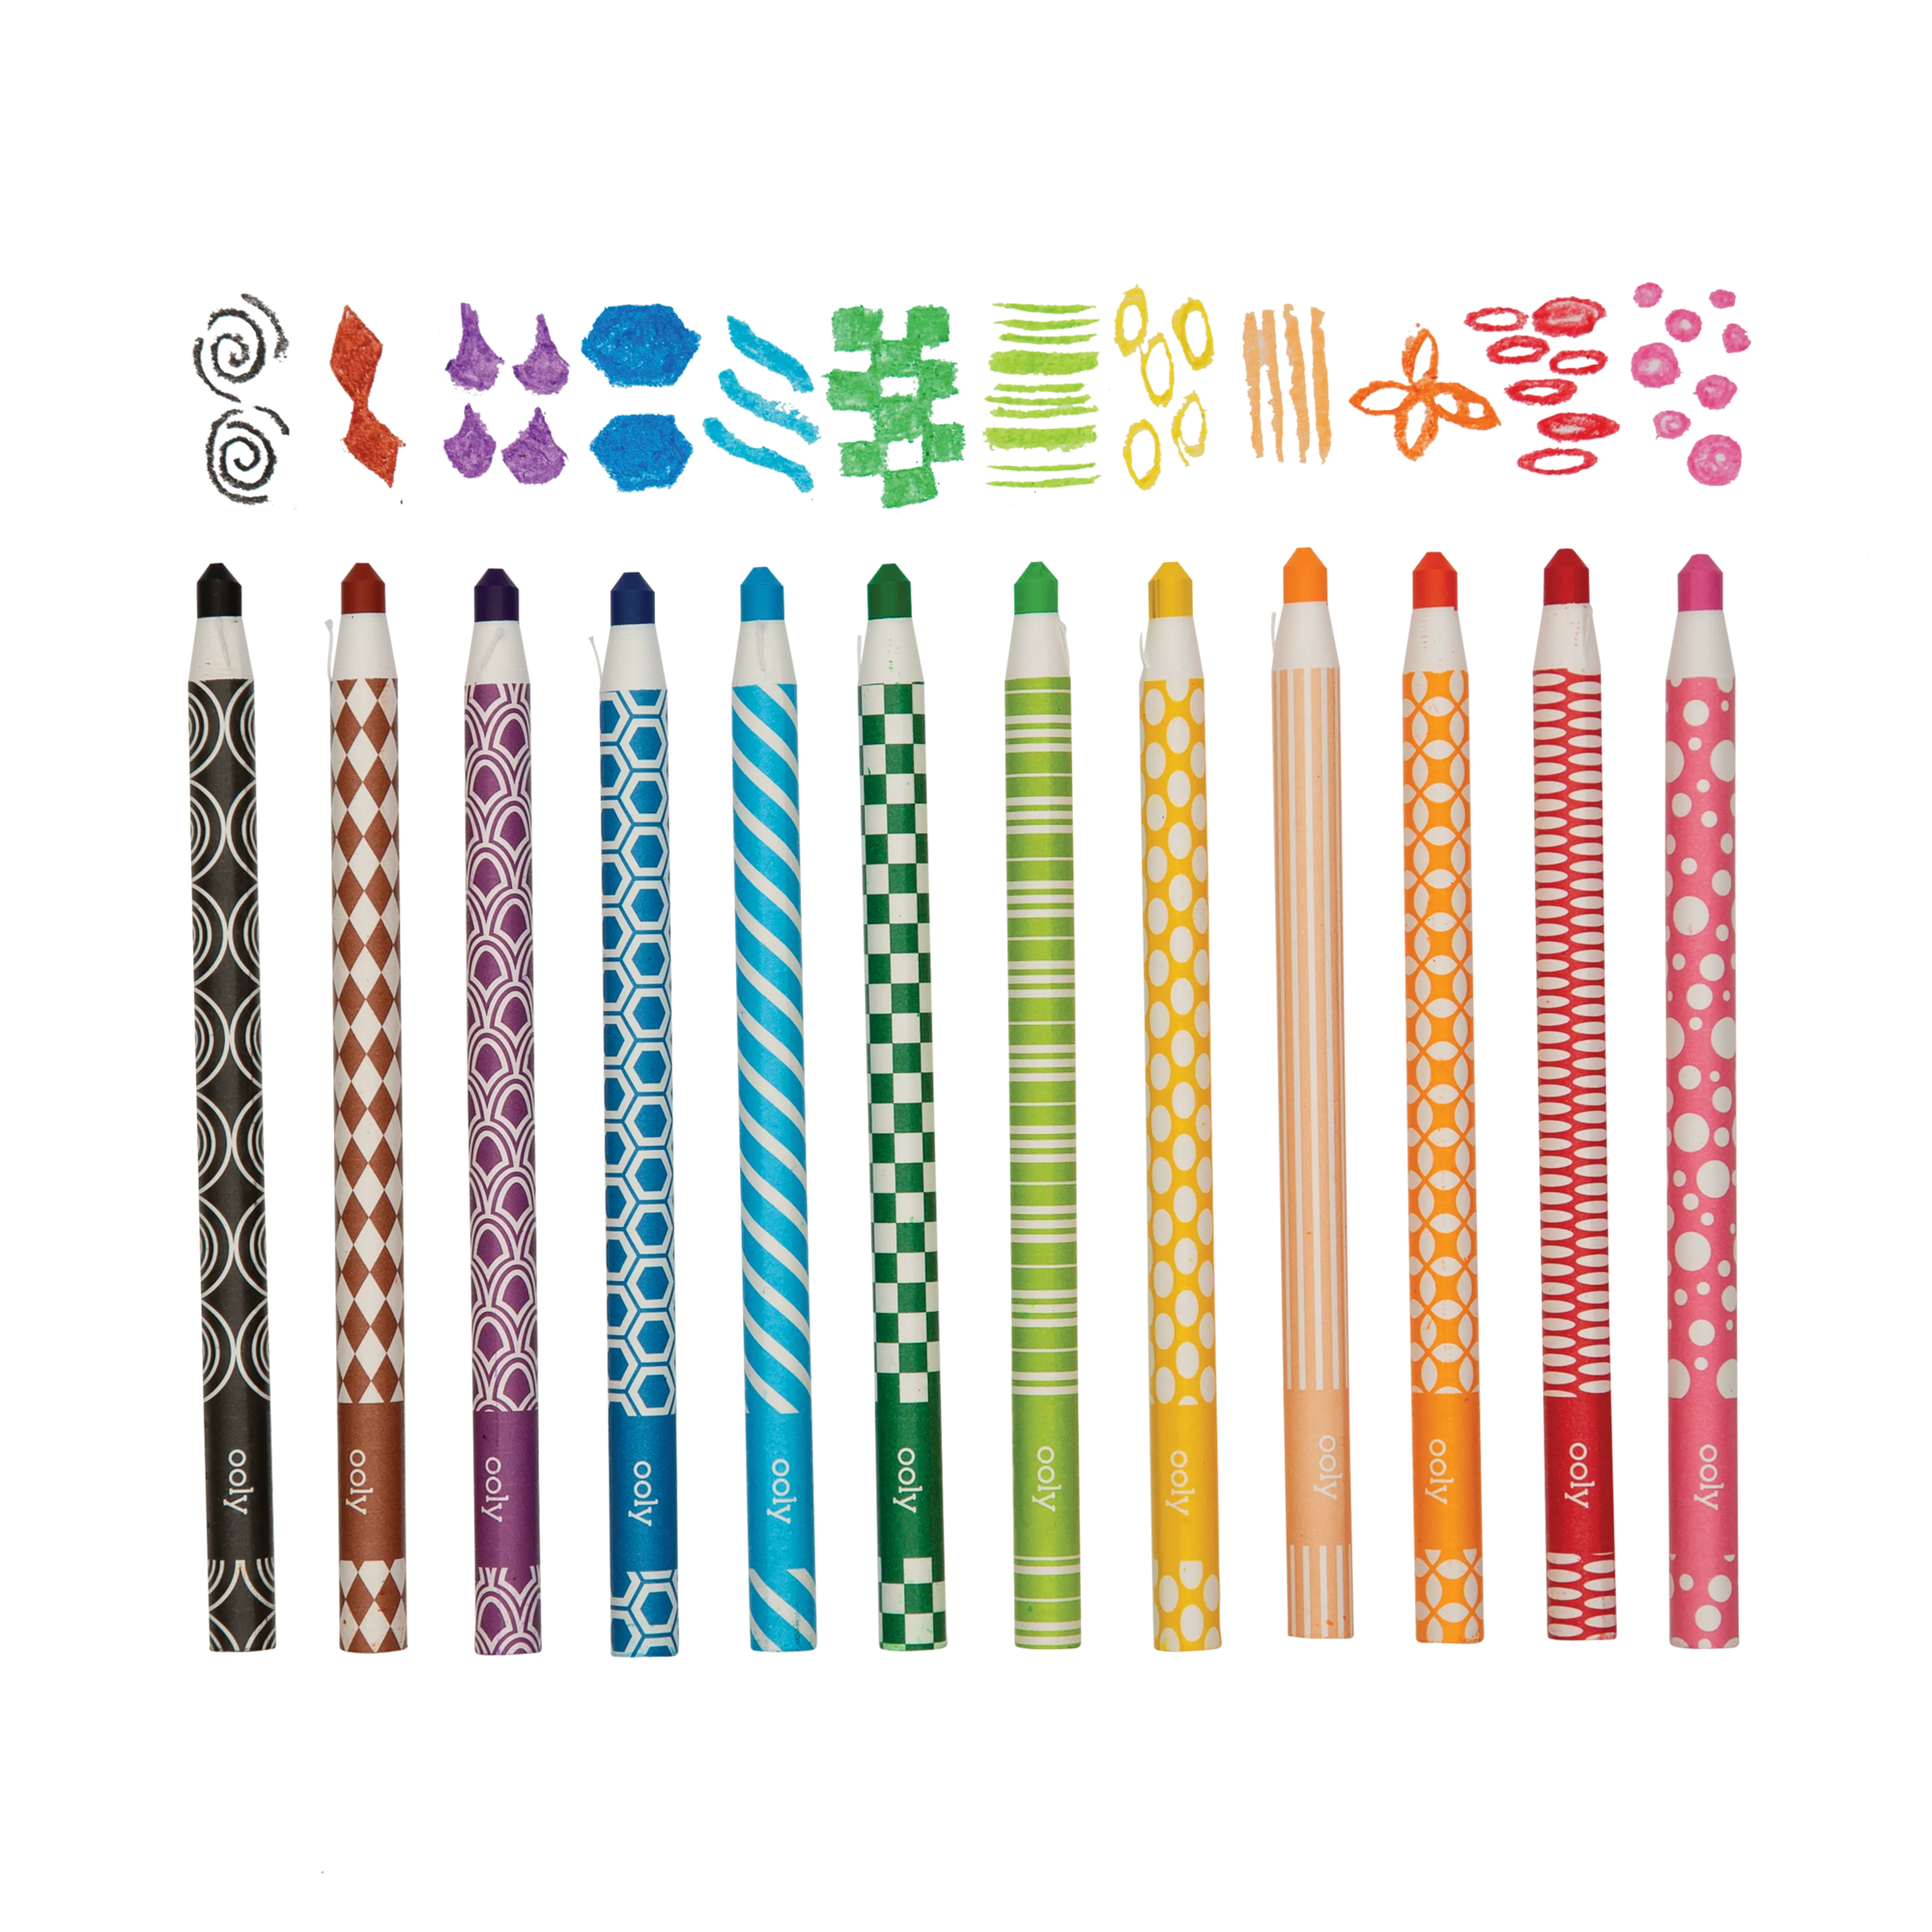 All 12 OOLY Color Appeel Crayon Sticks in a row with color swatches